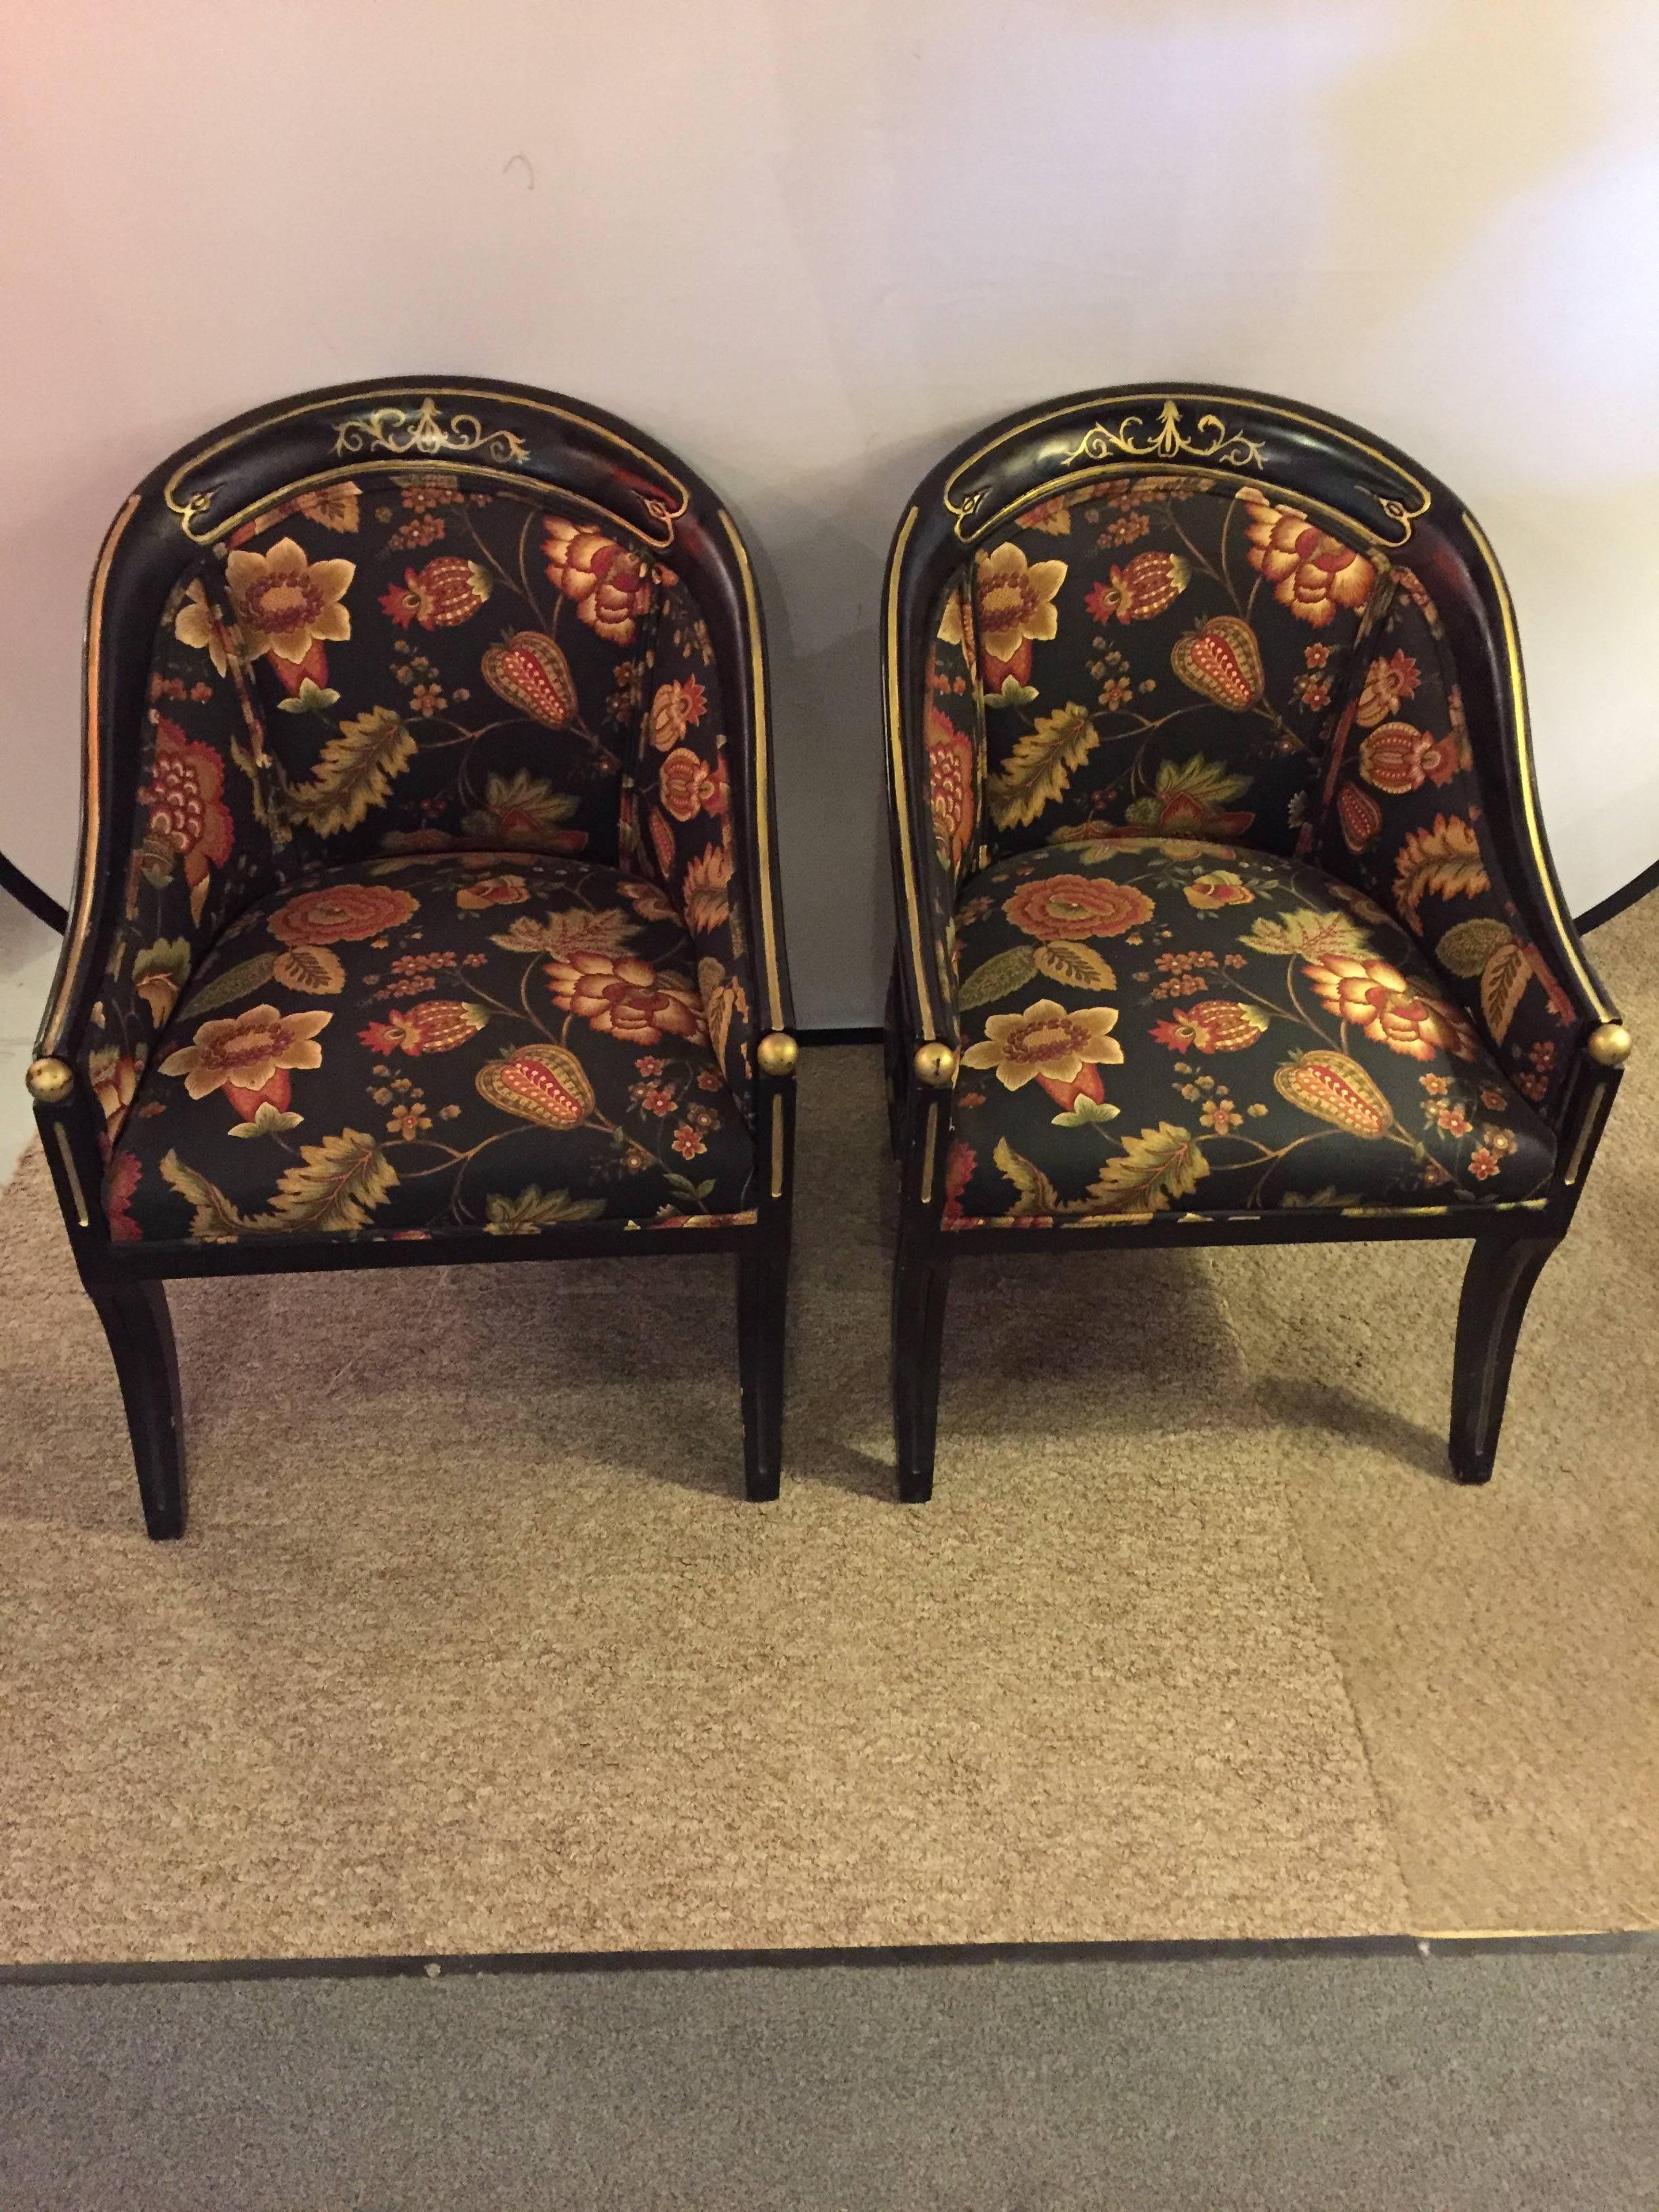 A pair of Hollywood Regency style ebonized armchairs. Each having an ebonized frame with side arms having gilt gold decorated balls on the hand rests. Both with floral upholstery and gilt scroll and line design on the back and arms.